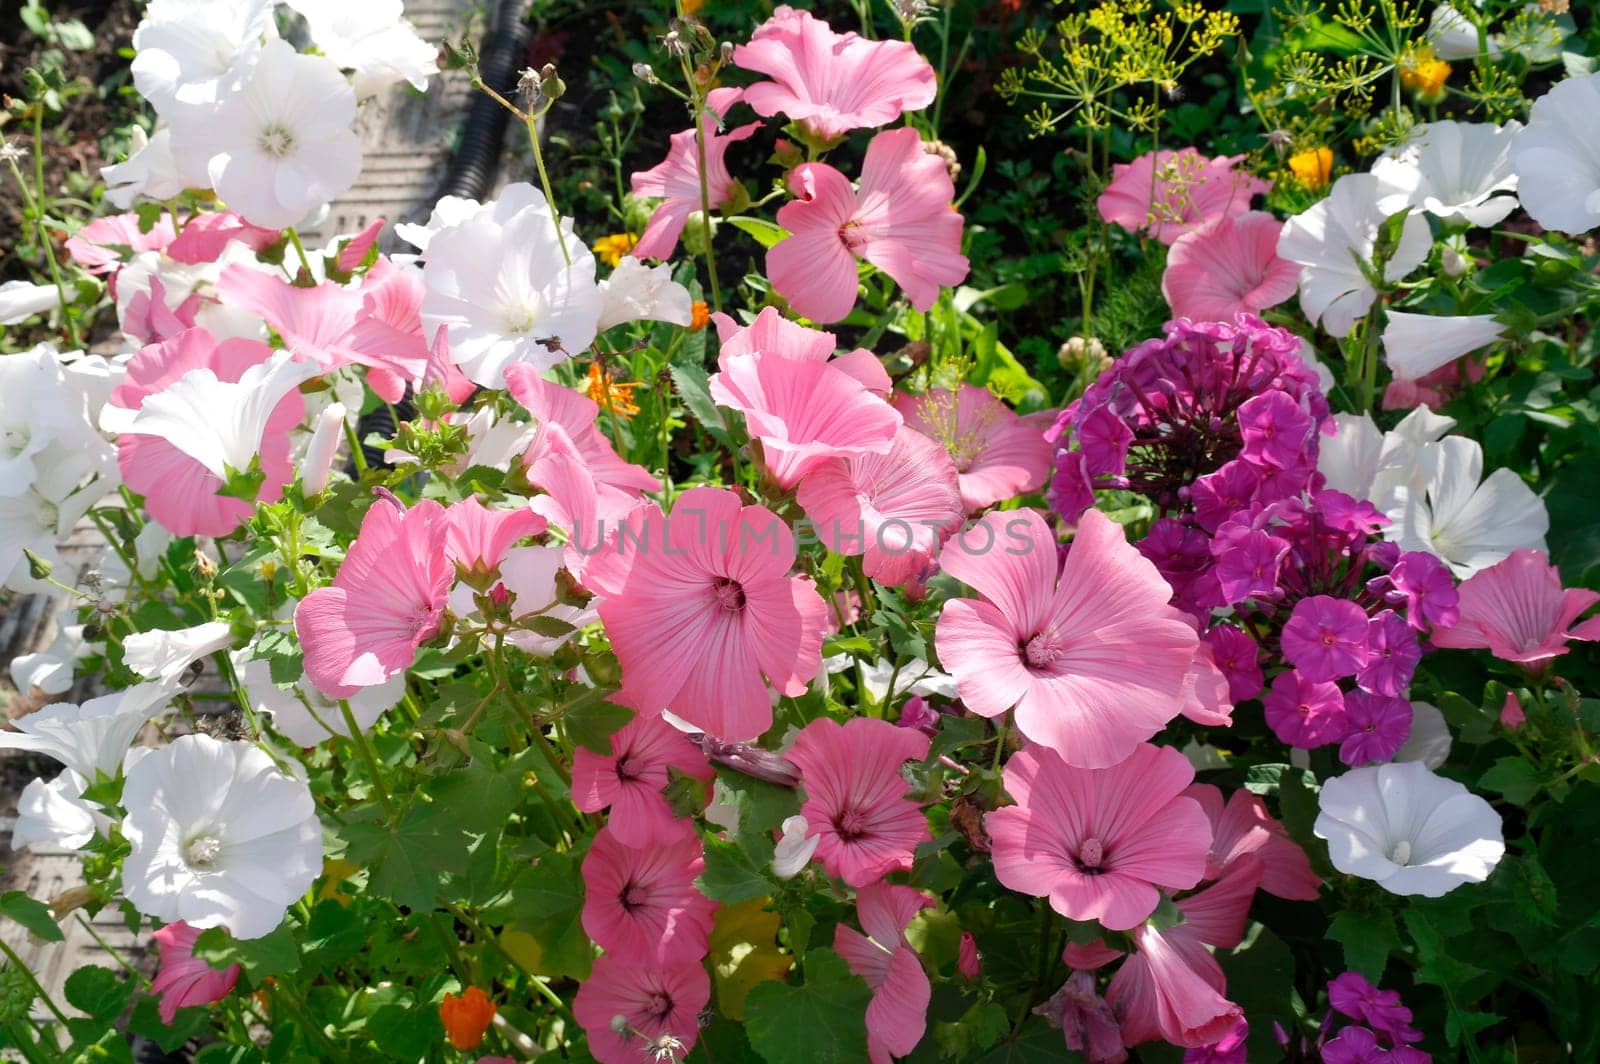 Pink flowers of Lavatera in the garden. Blooming summer flower bed. Close-up photo of flowers.